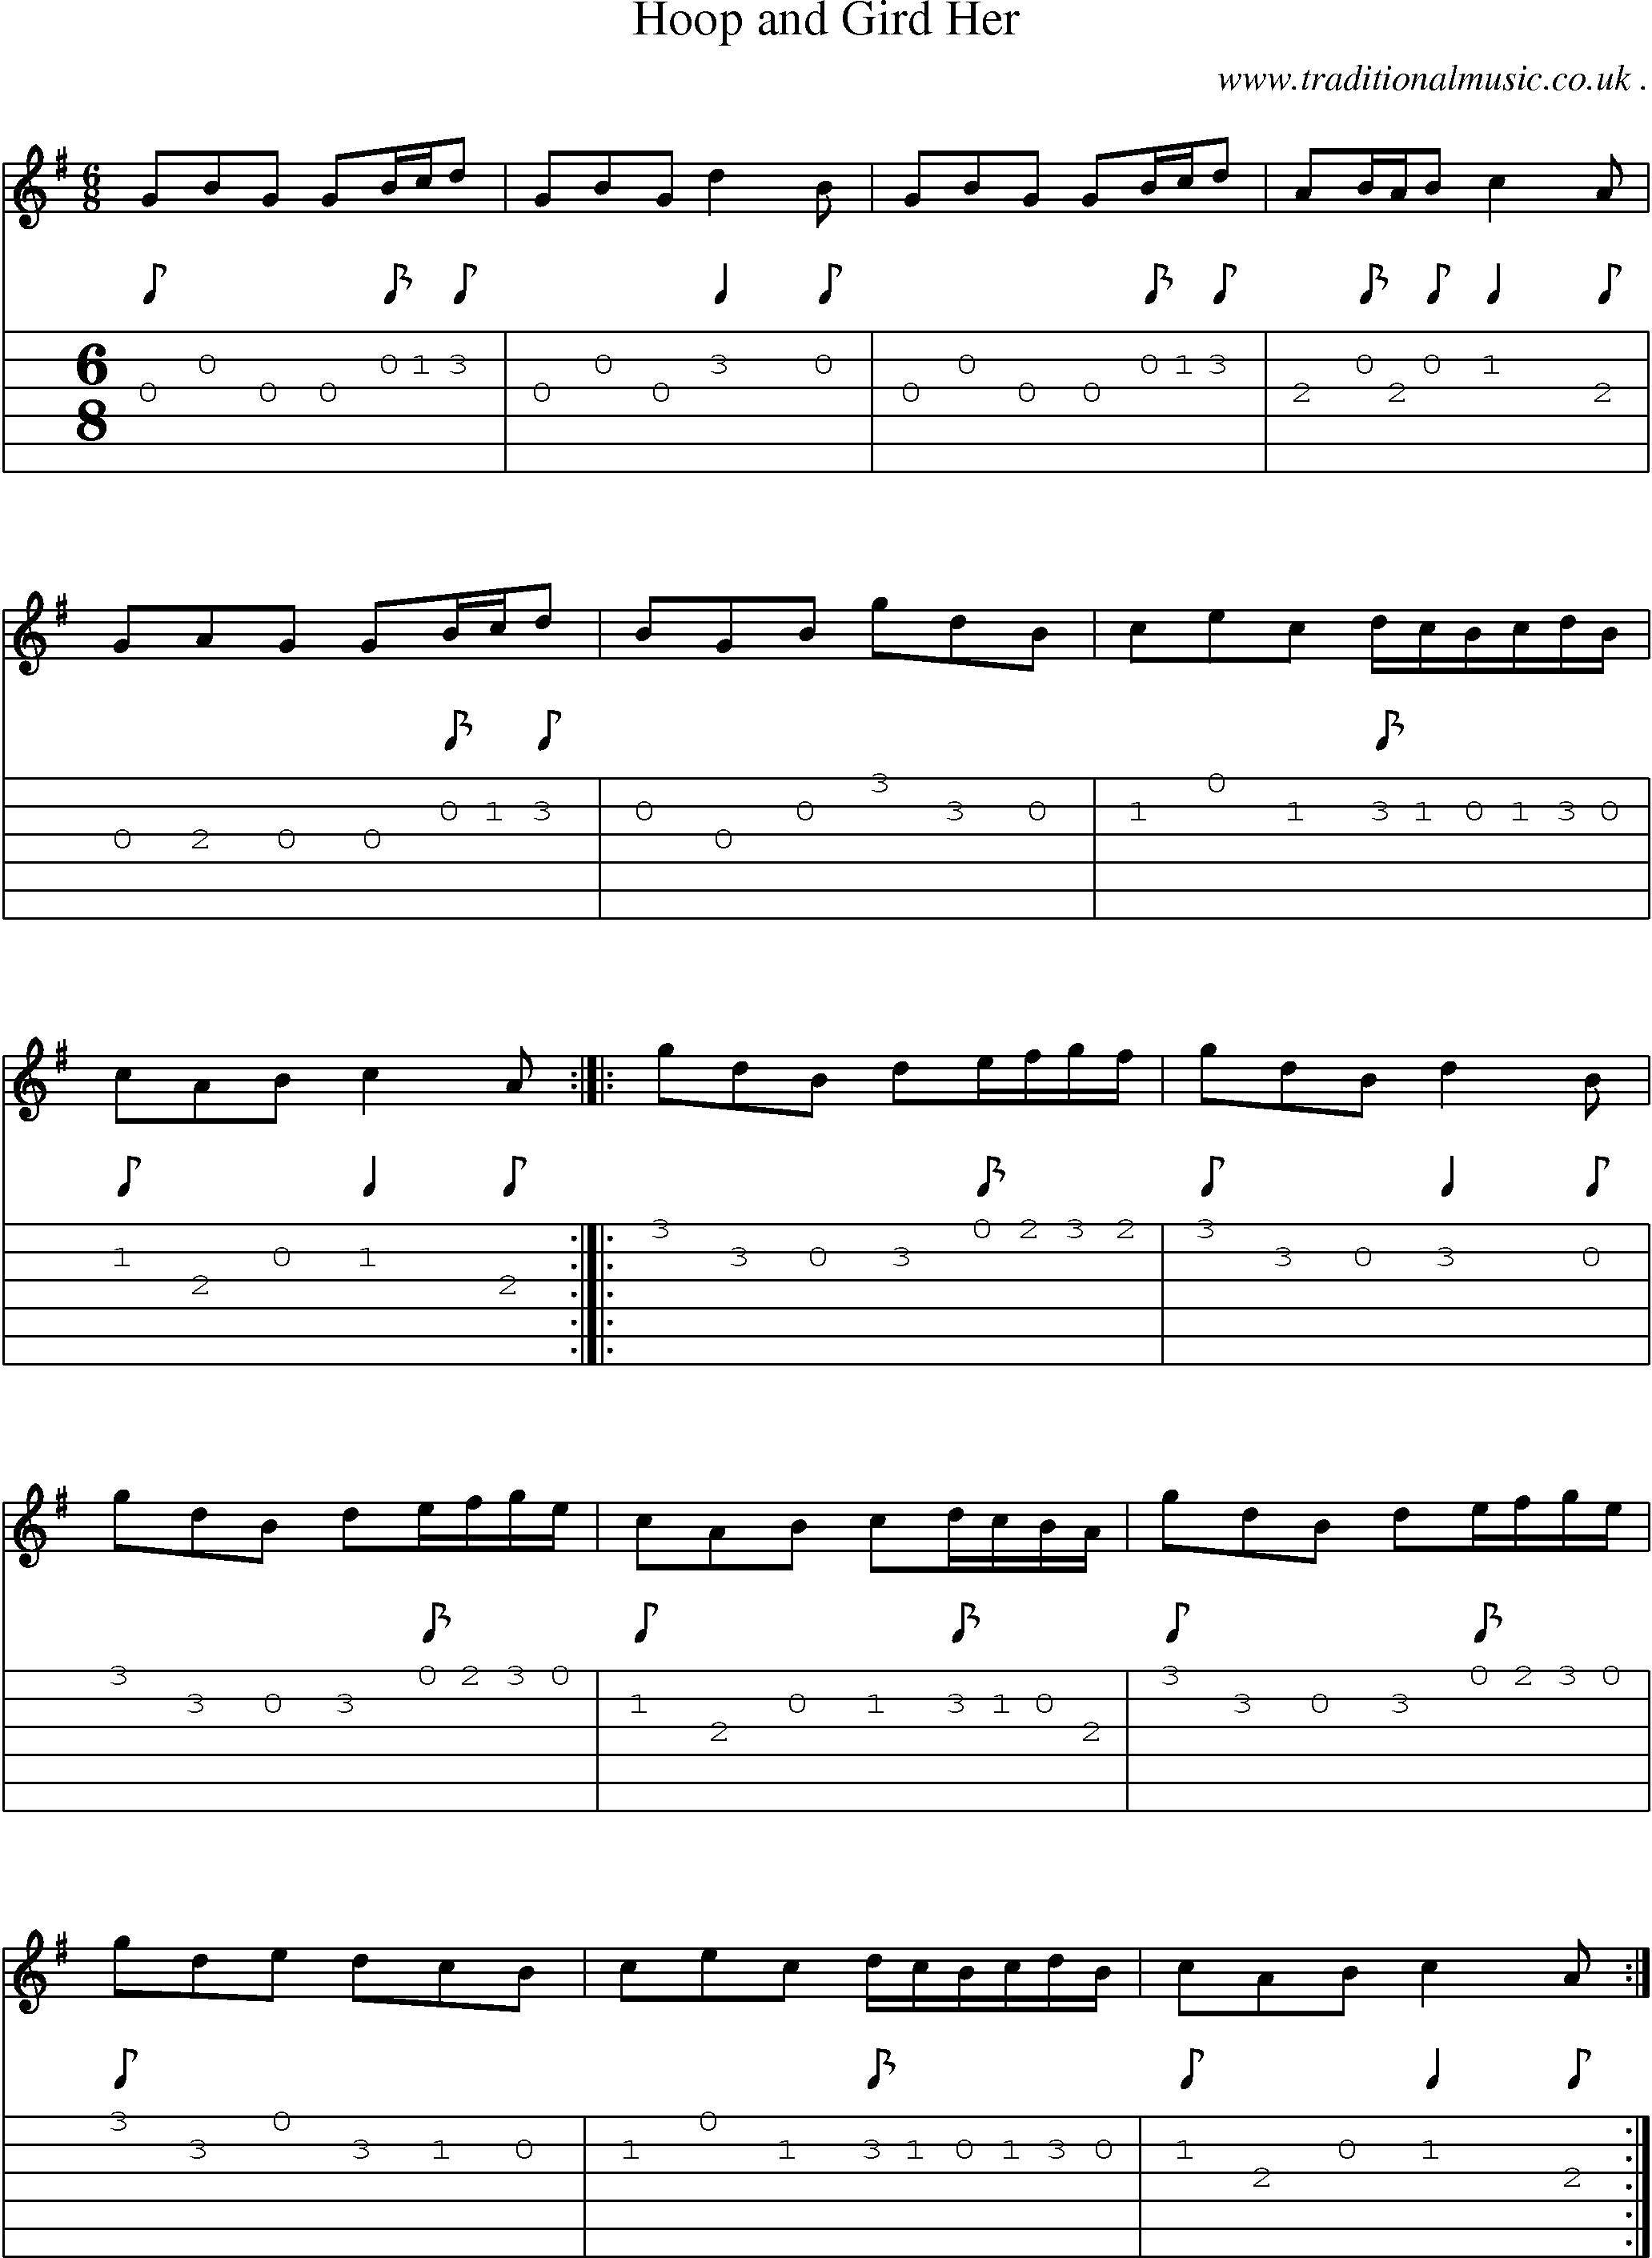 Sheet-Music and Guitar Tabs for Hoop And Gird Her